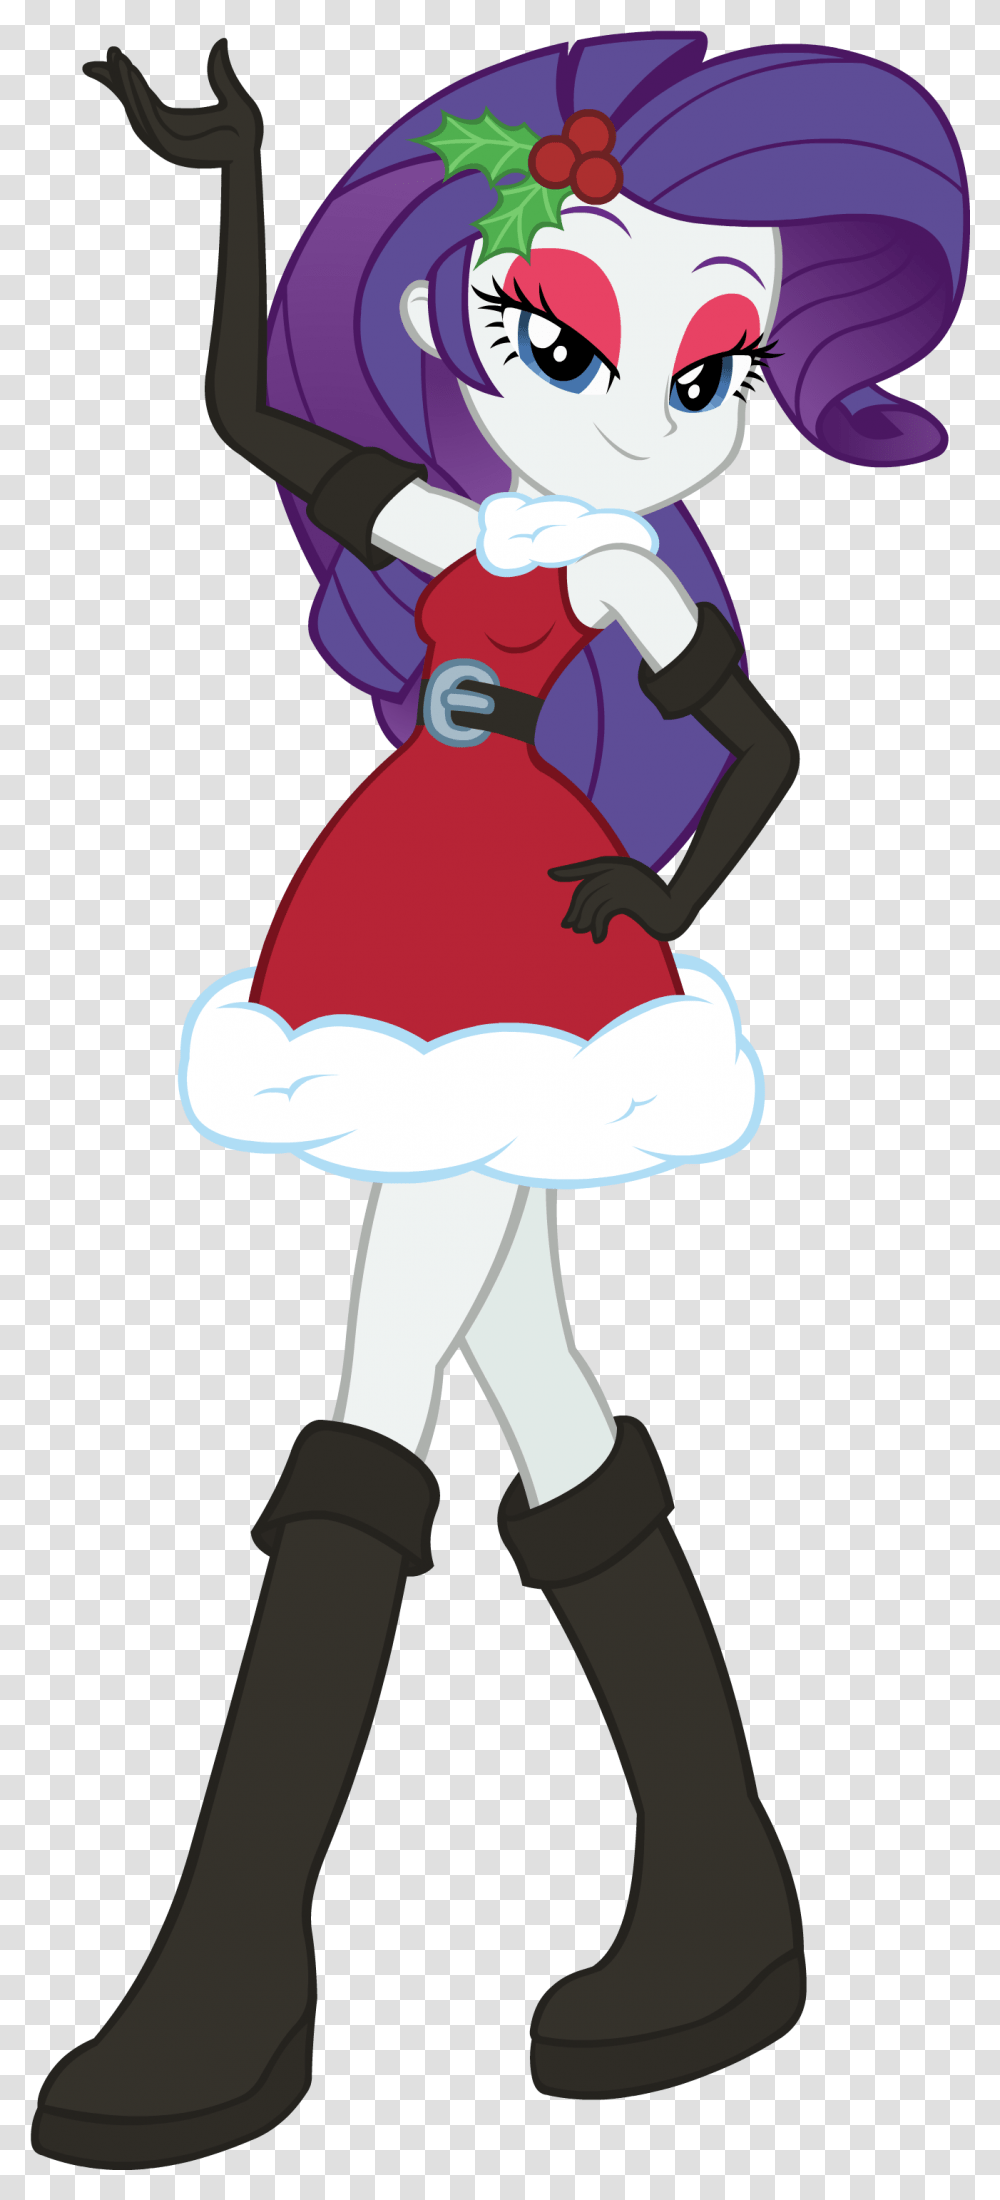 Download Hd A Christmas Rarity Doctor Rarity My Little Pony Christmas, Toy, Hand, Graphics, Art Transparent Png